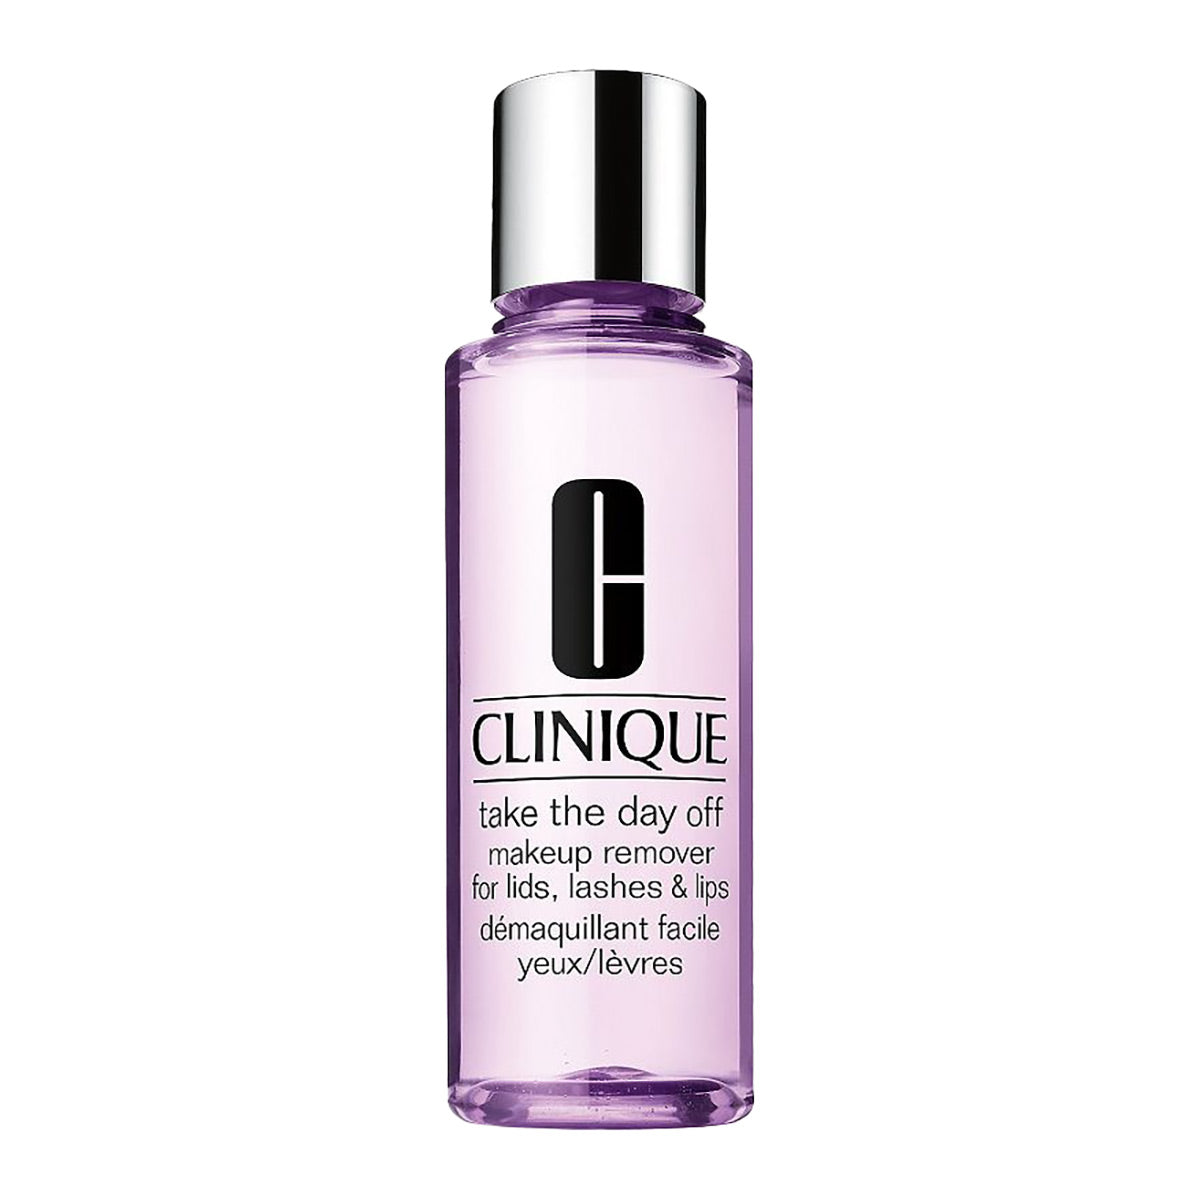 Clinique Take The Day Off Makeup Remover For Lids, Lashes & Lips 4.2 oz / 125 ml